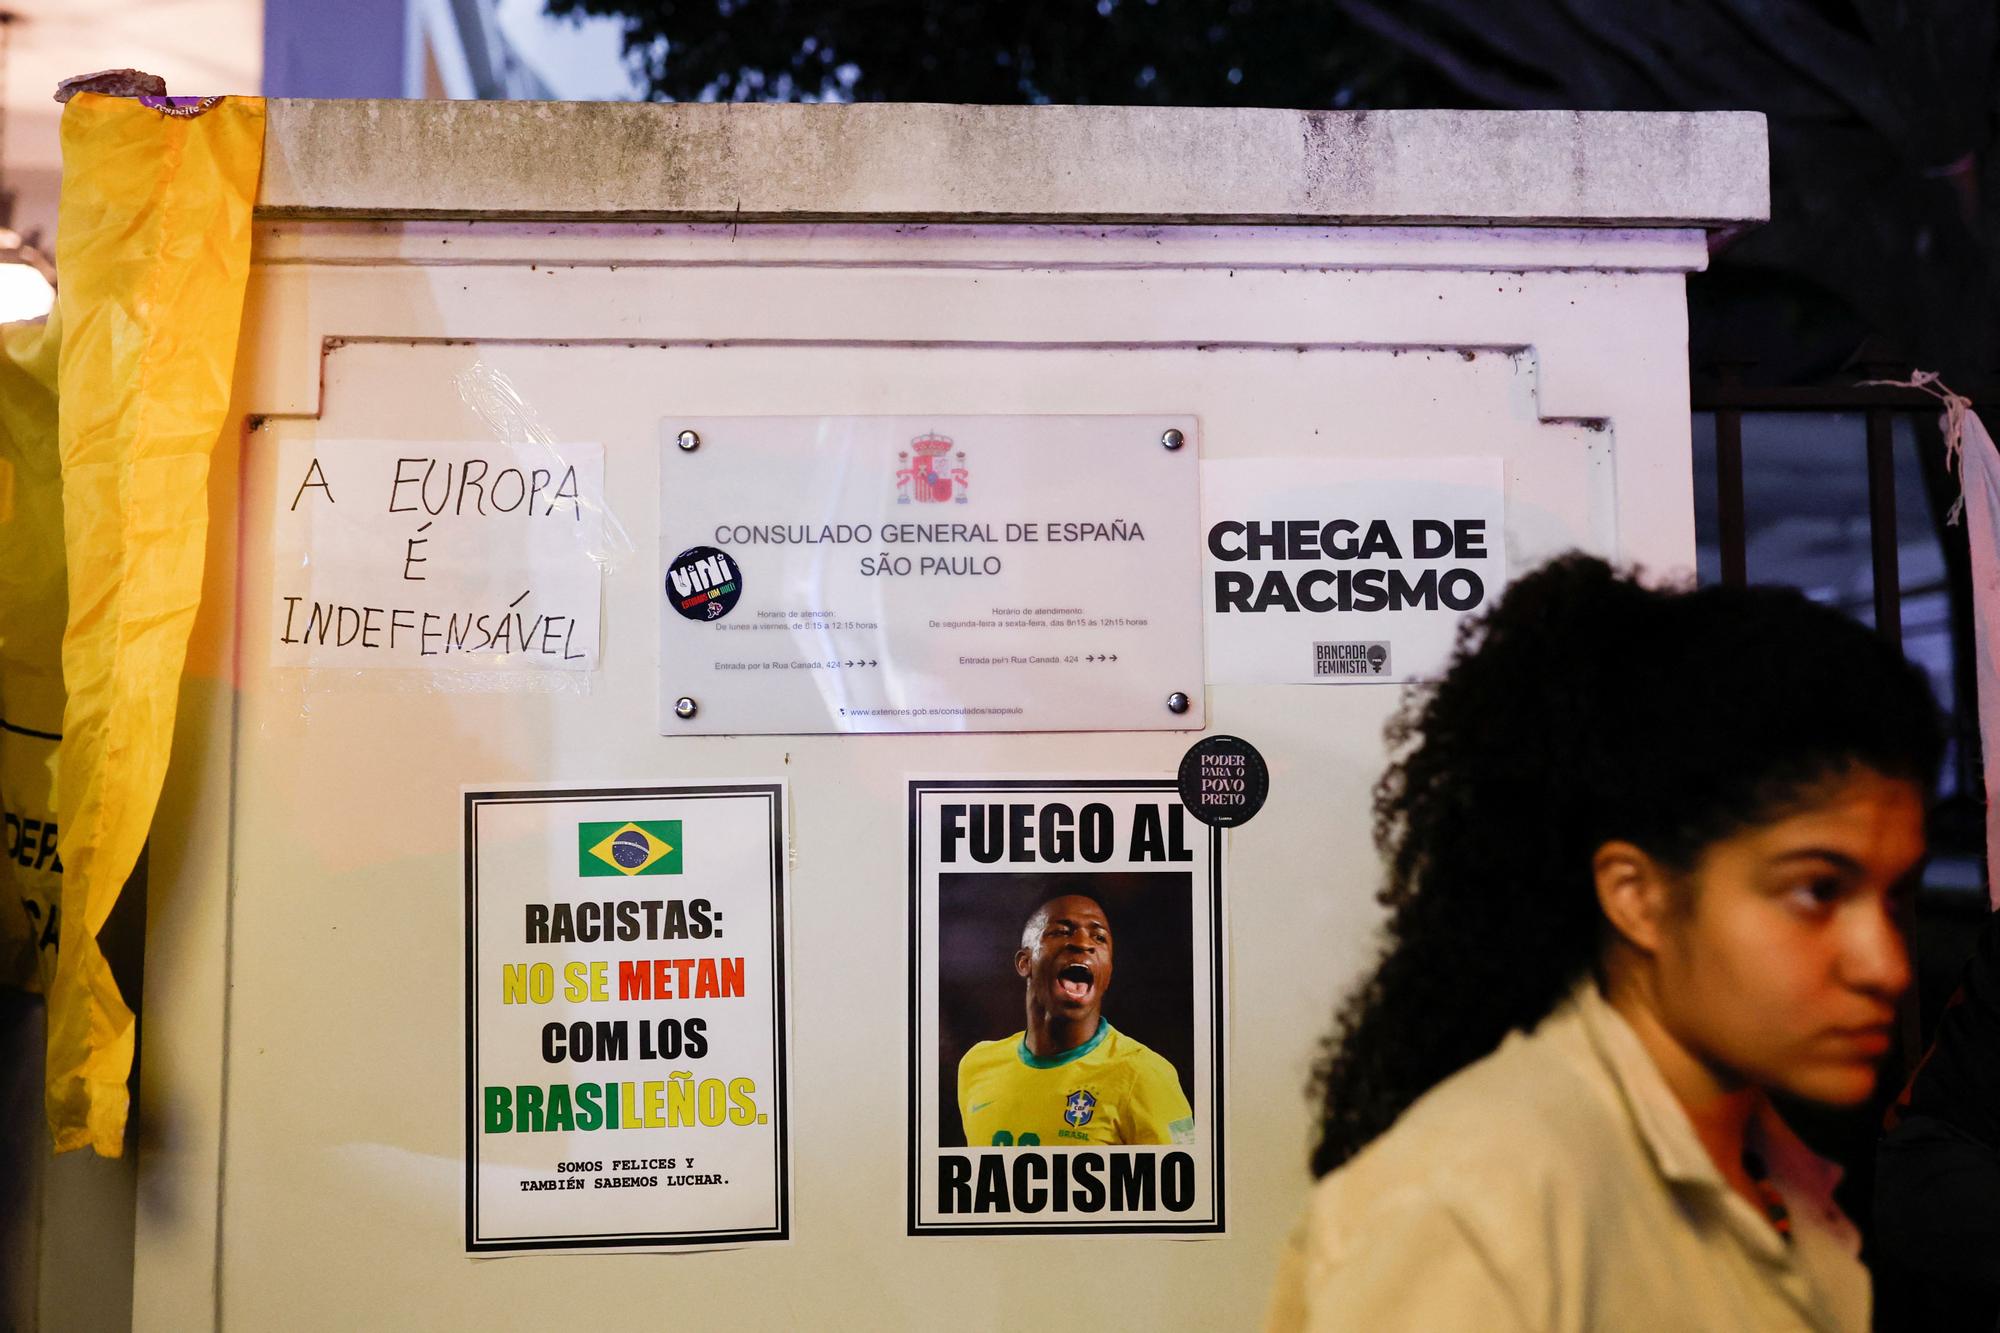 People protest in solidarity with Real Madrid soccer player Vinicius Jr, who was racially abused during a club match in Spain, in Sao Paulo